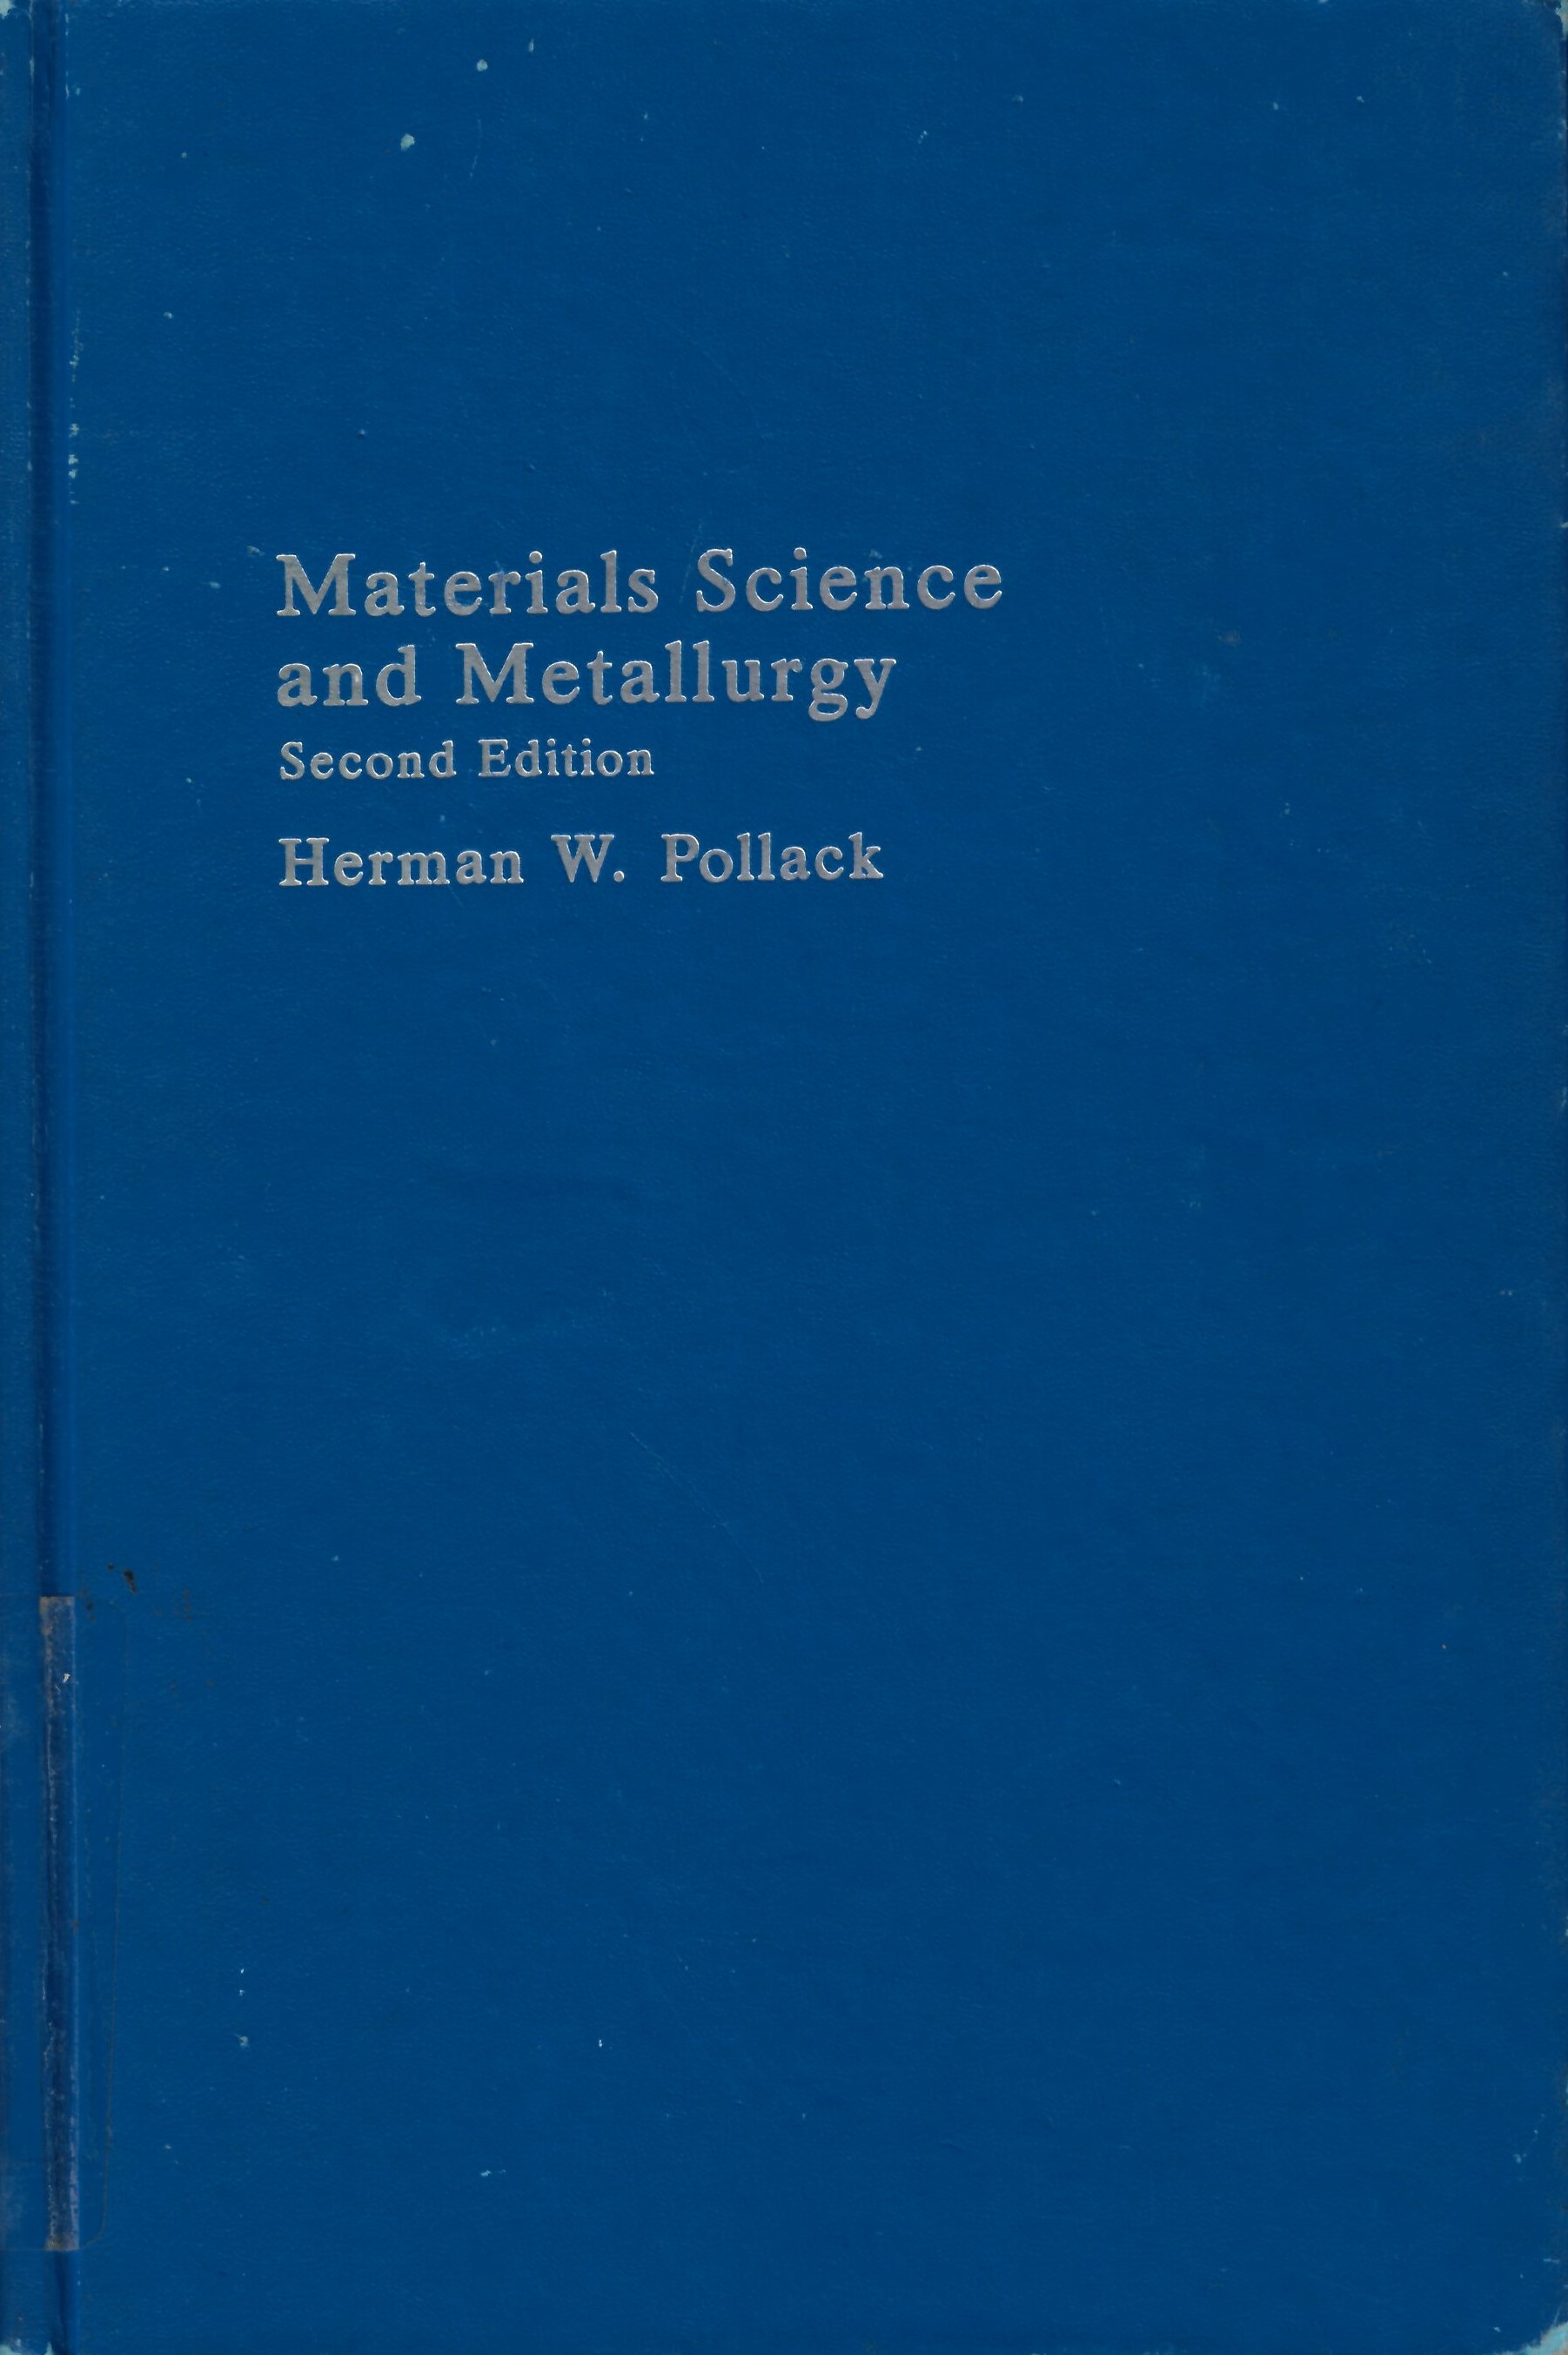 Materials science and metallurgy